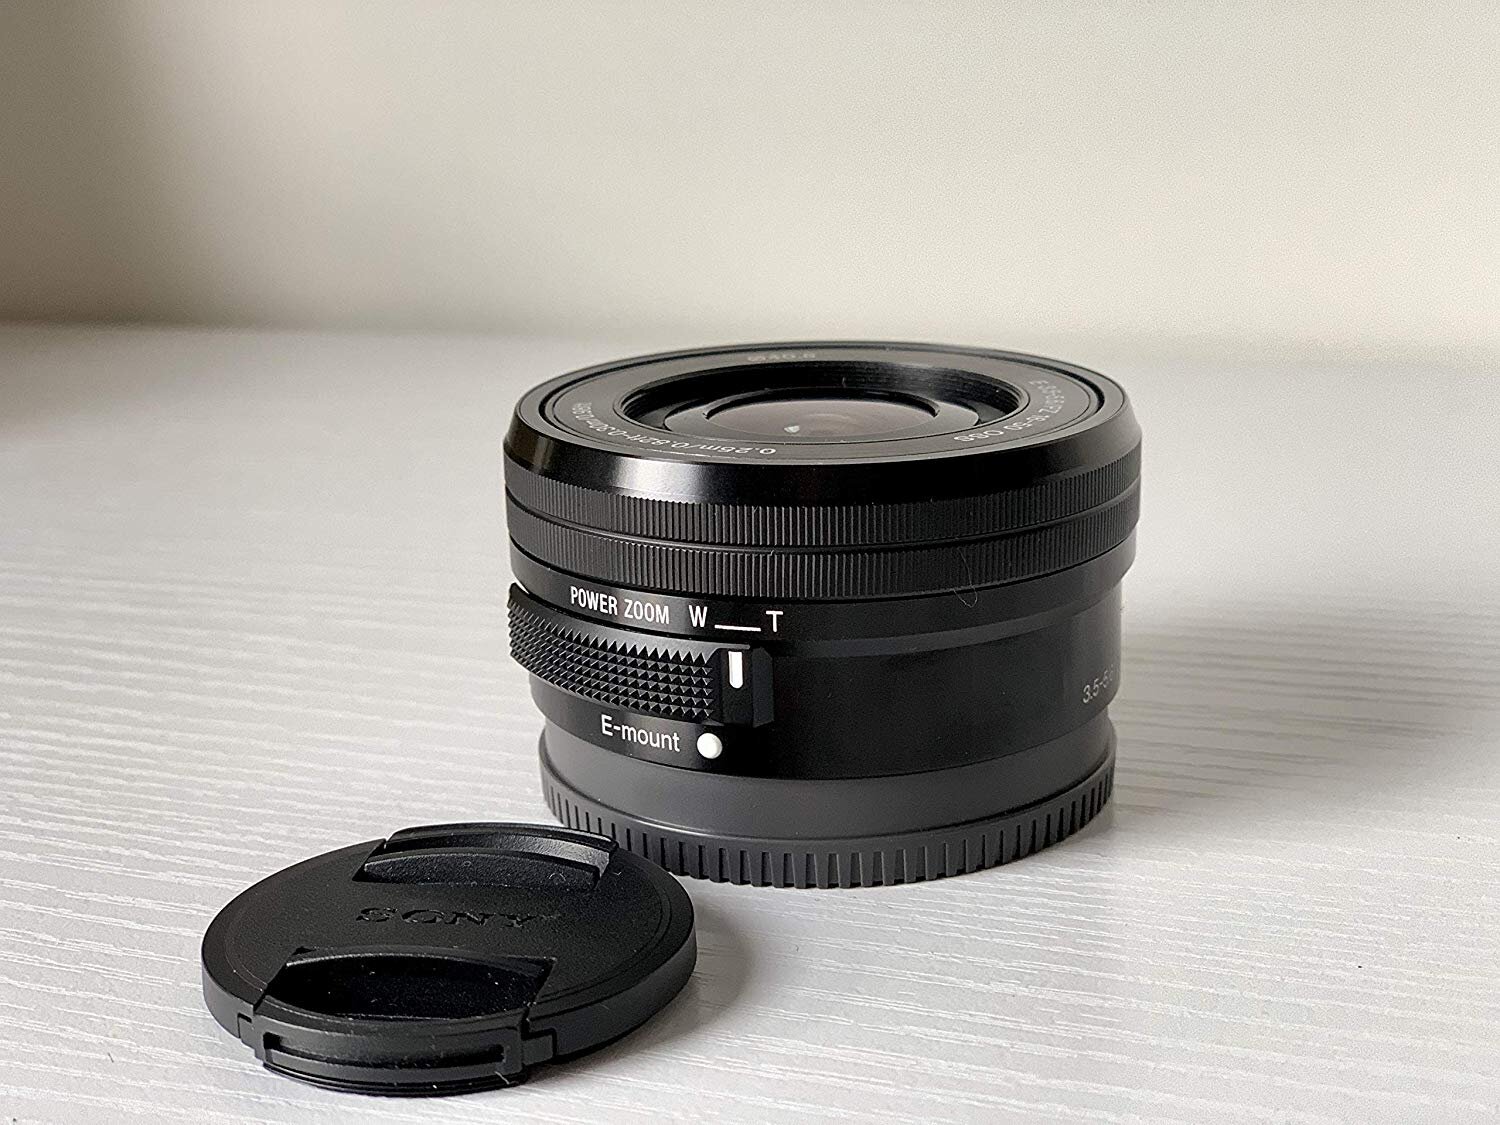 Stroomopwaarts Helemaal droog Aanbod Primes & All-In-Ones: The Best Travel Lens for Sony A6000, 6400 & 6500 —  The Gone Goat